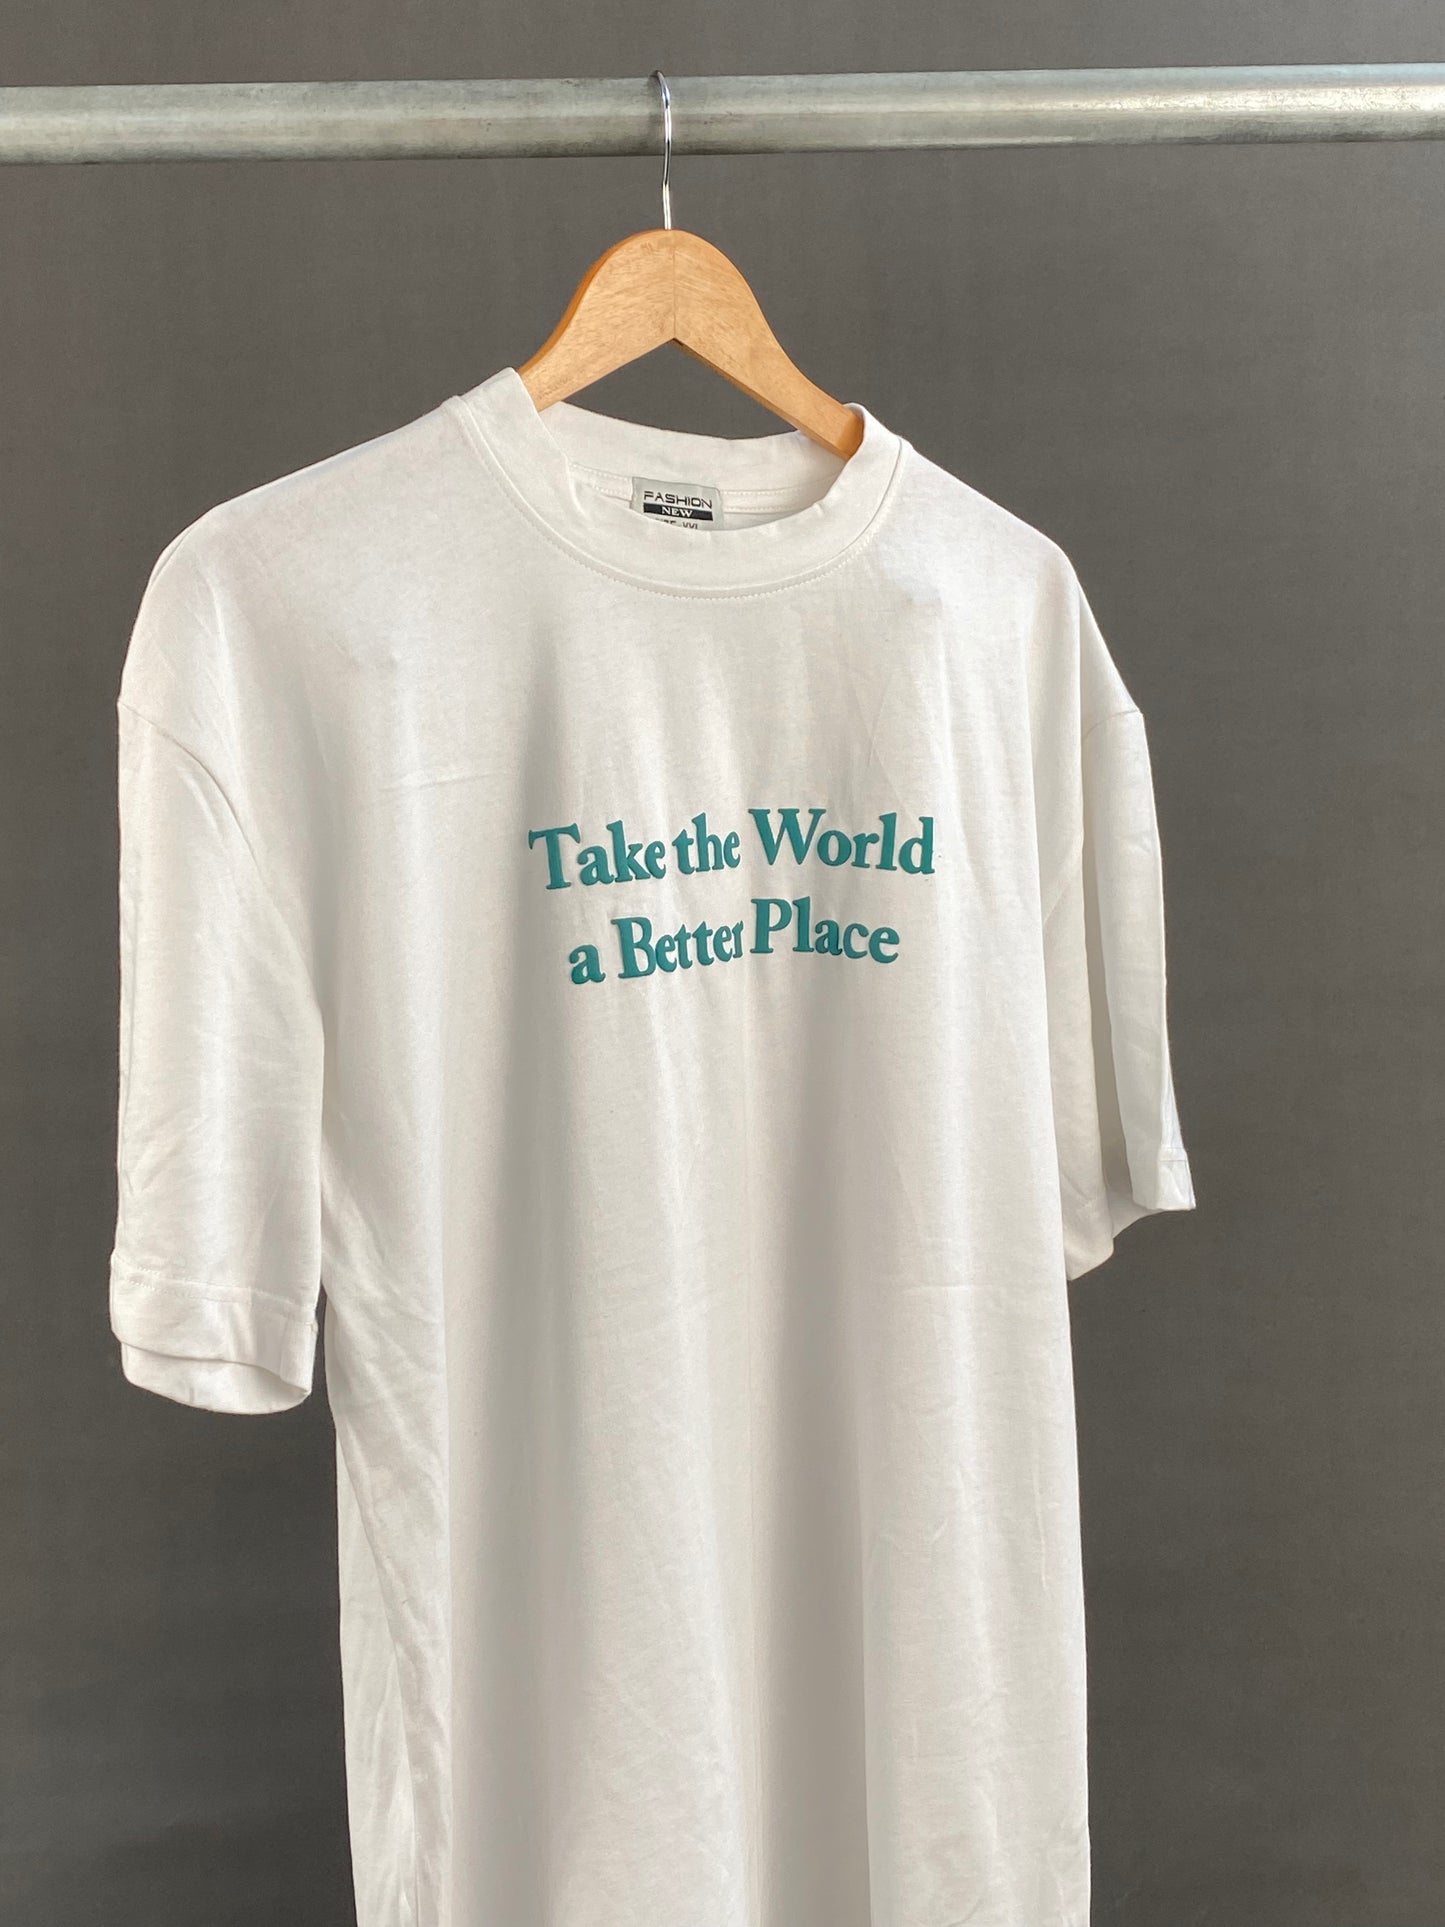 Take the world a better place tee